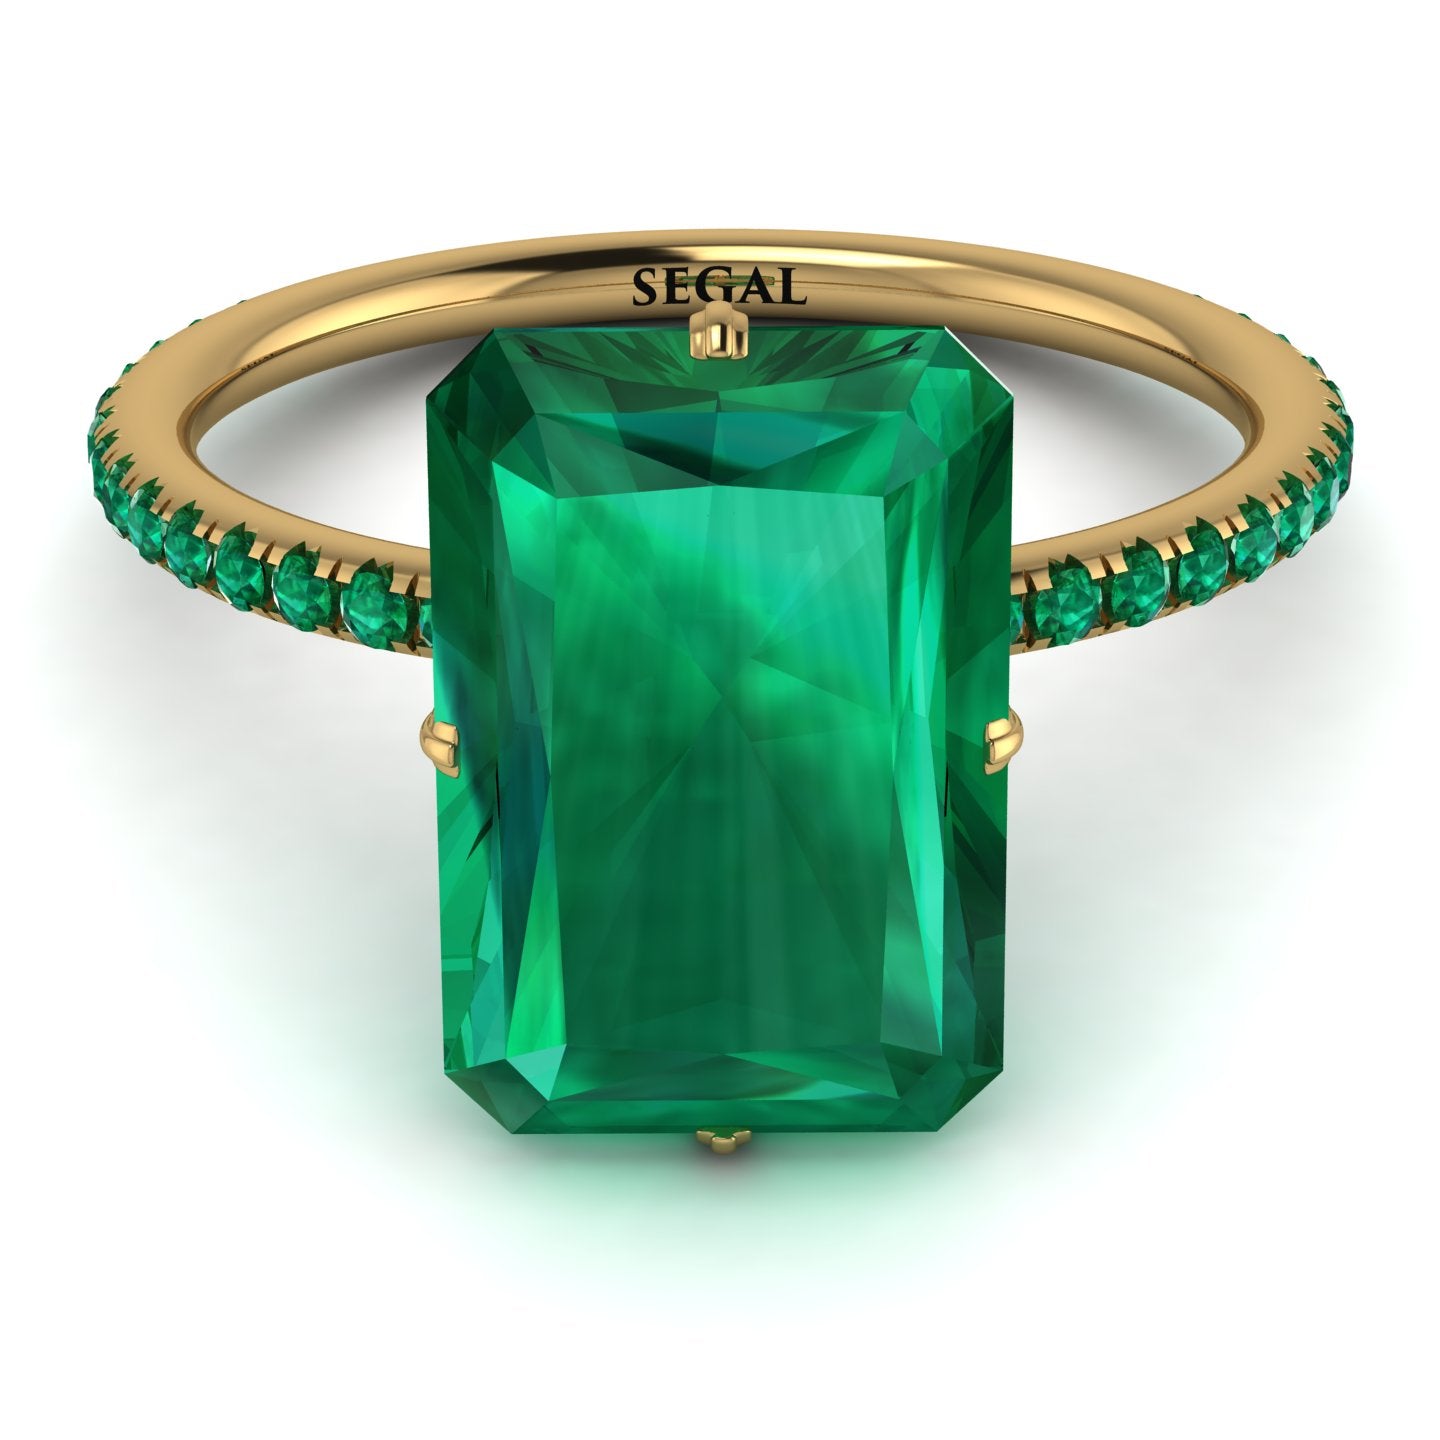 Buying an Emerald Engagement Ring | With Clarity